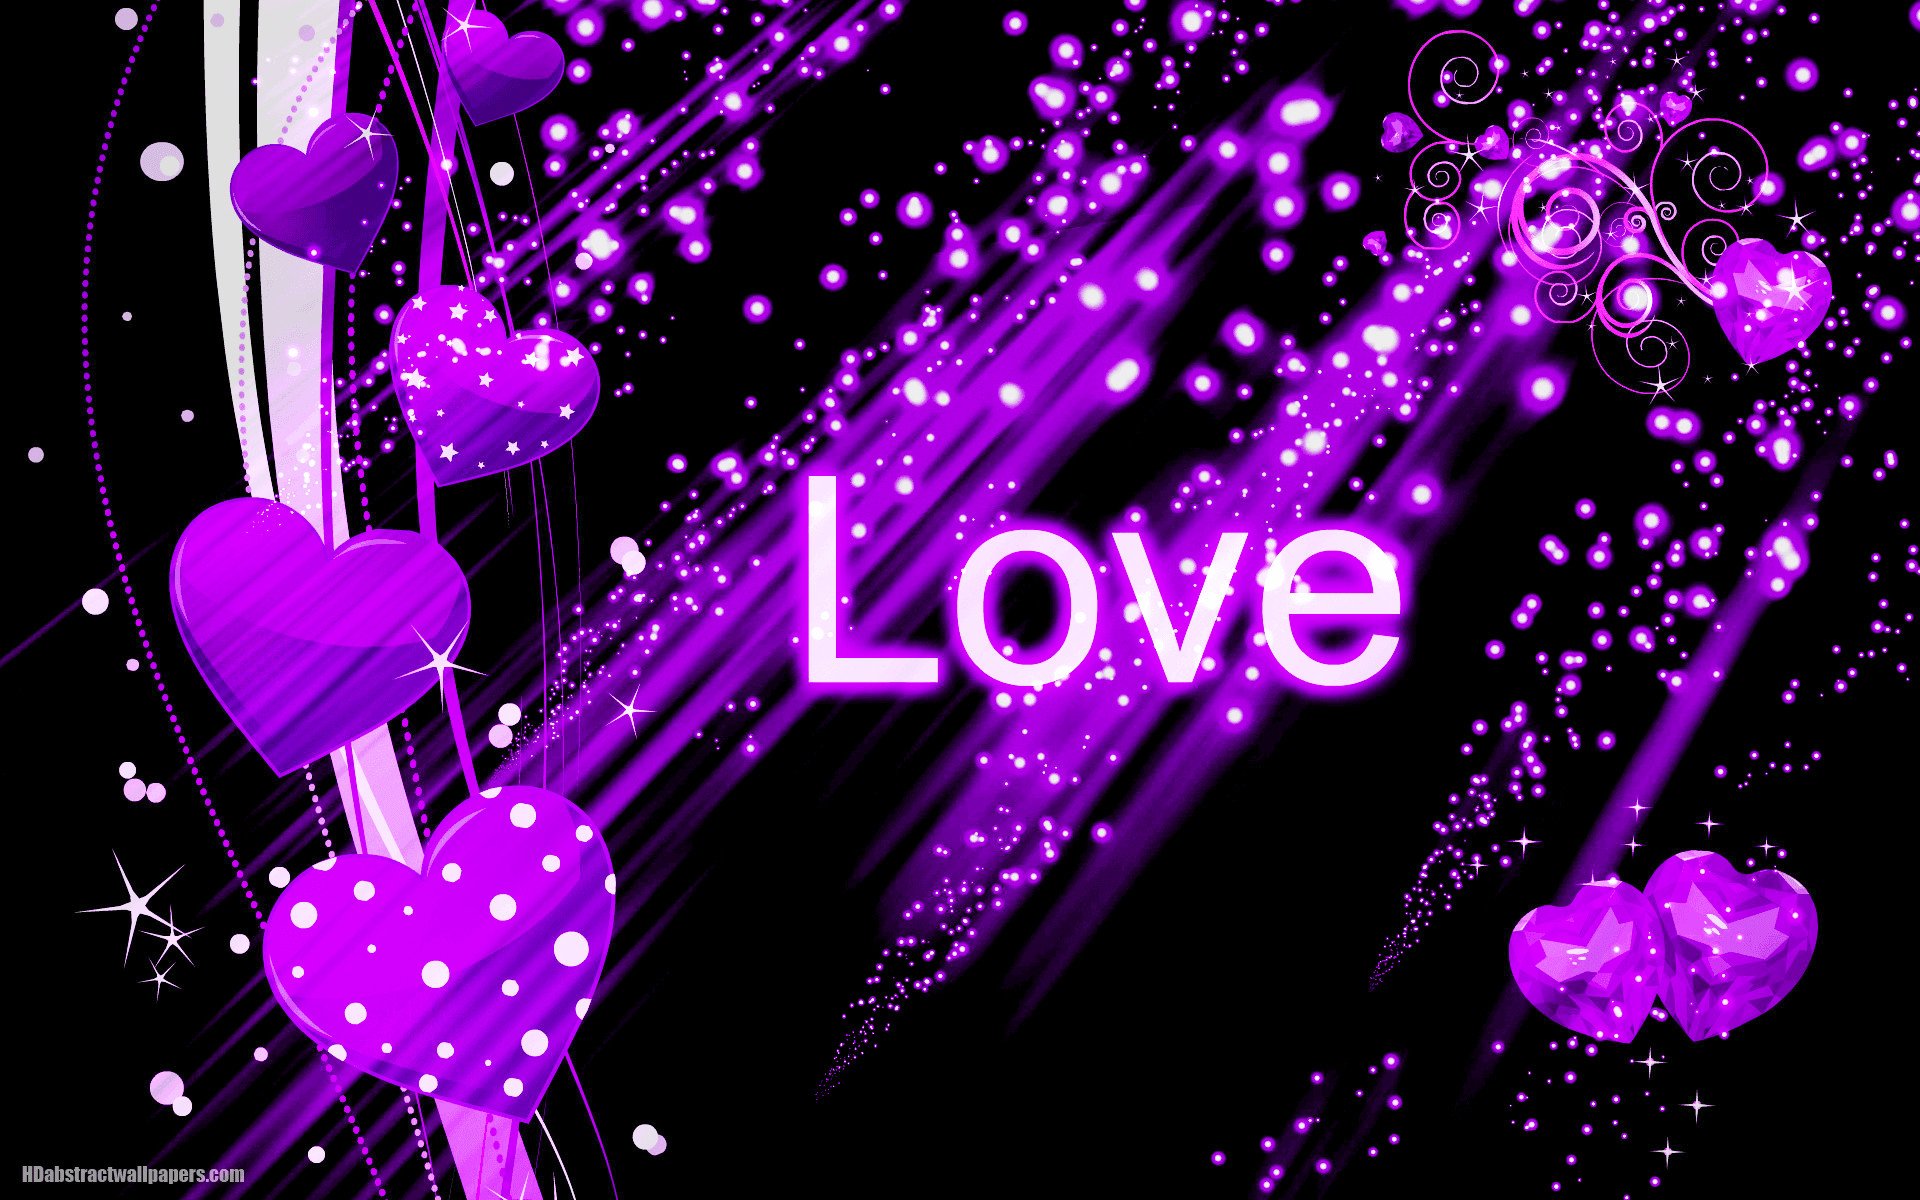 Beautiful black abstract wallpaper with purple love hearts and the text love. Send this background to your boy or girlfriend, just to say that you are